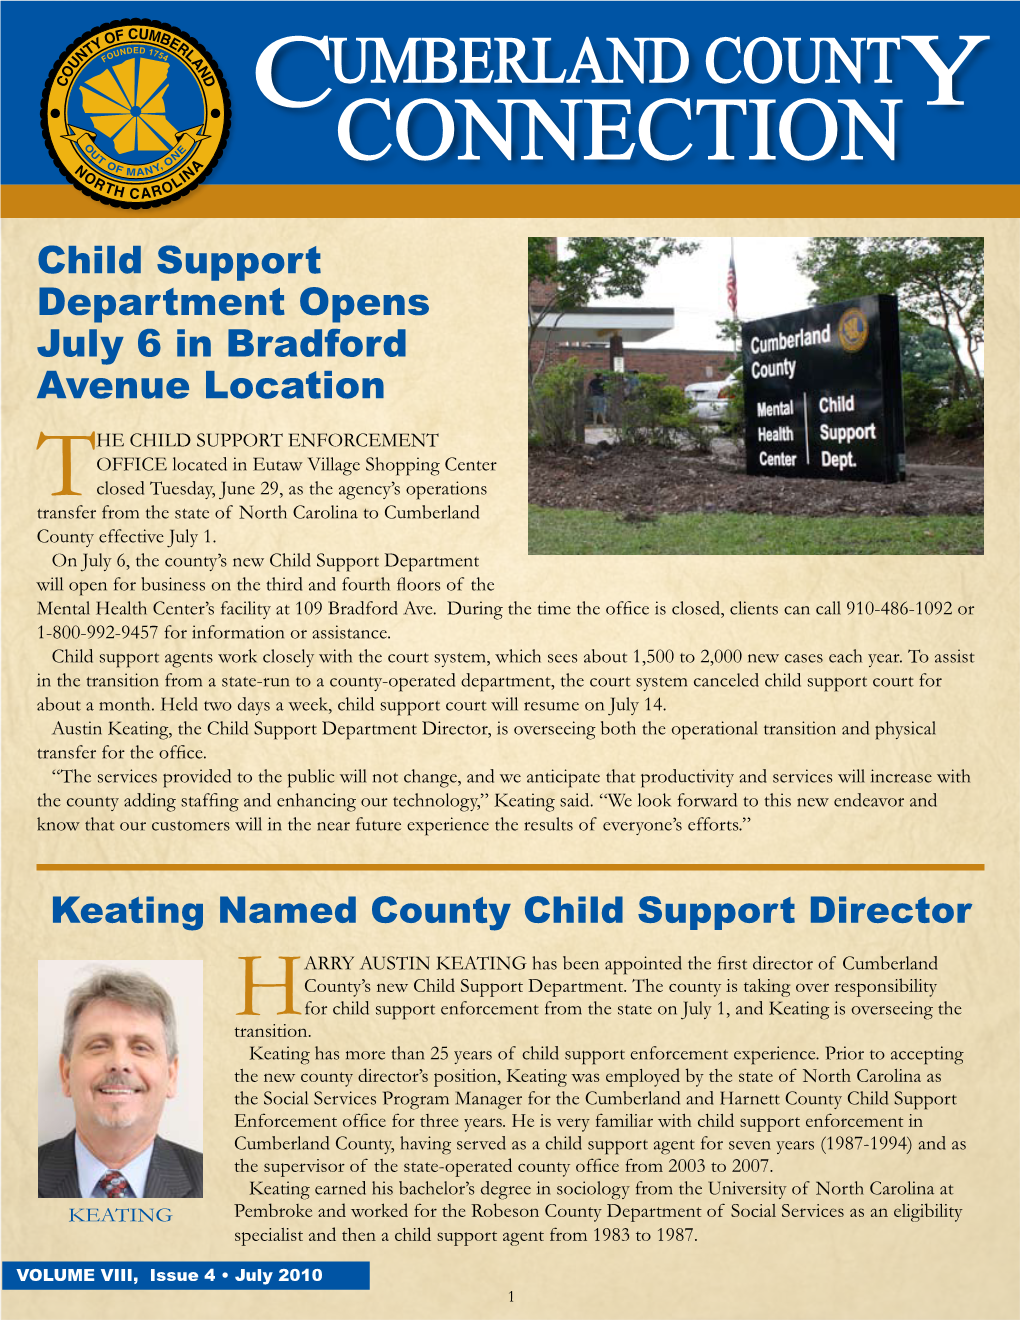 Child Support Department Opens July 6 in Bradford Avenue Location